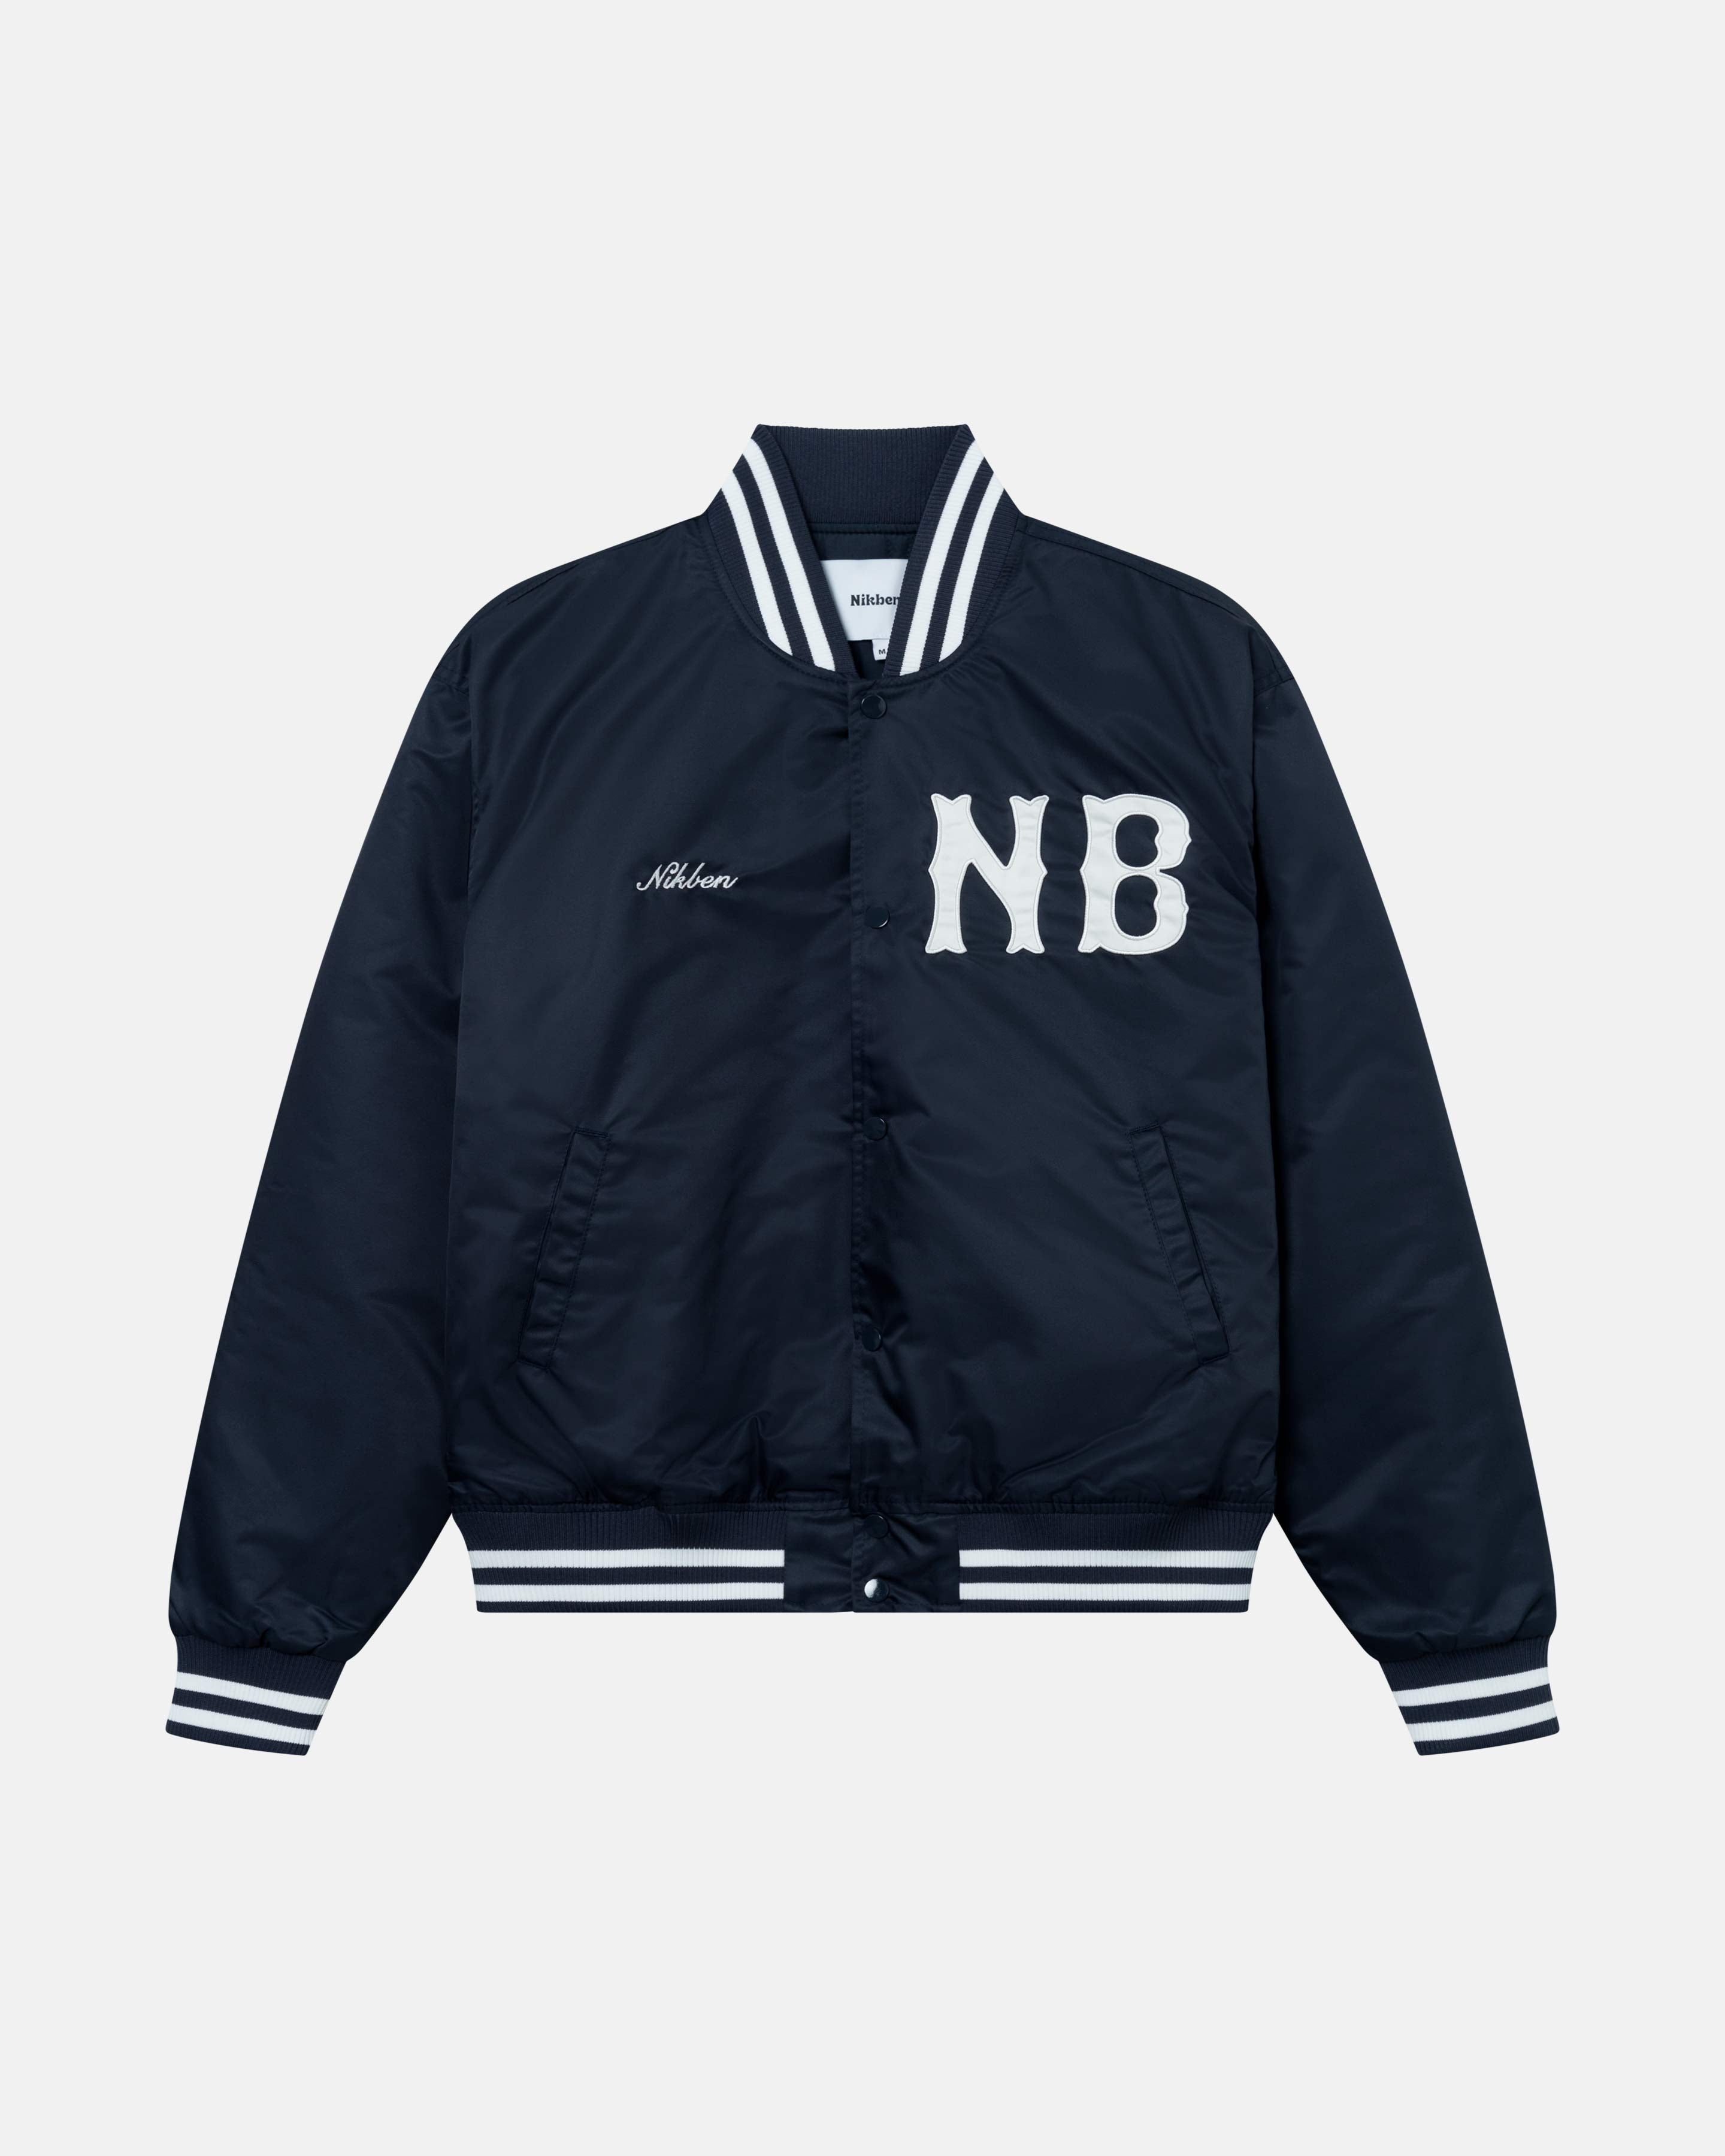 Navy Blue 80s style baseball jacket with embroidered 